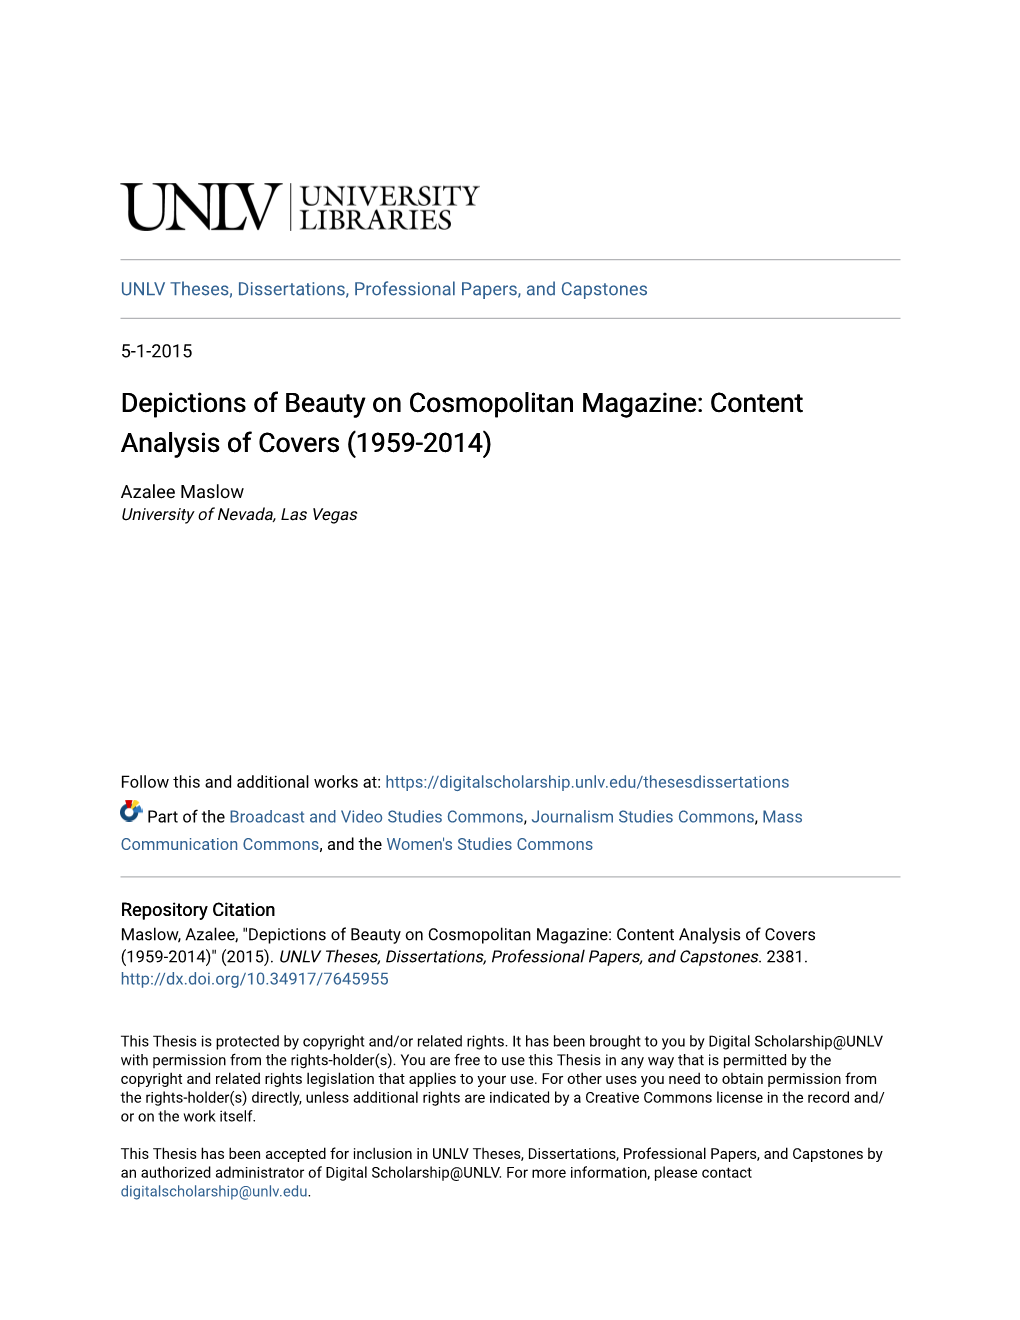 Depictions of Beauty on Cosmopolitan Magazine: Content Analysis of Covers (1959-2014)